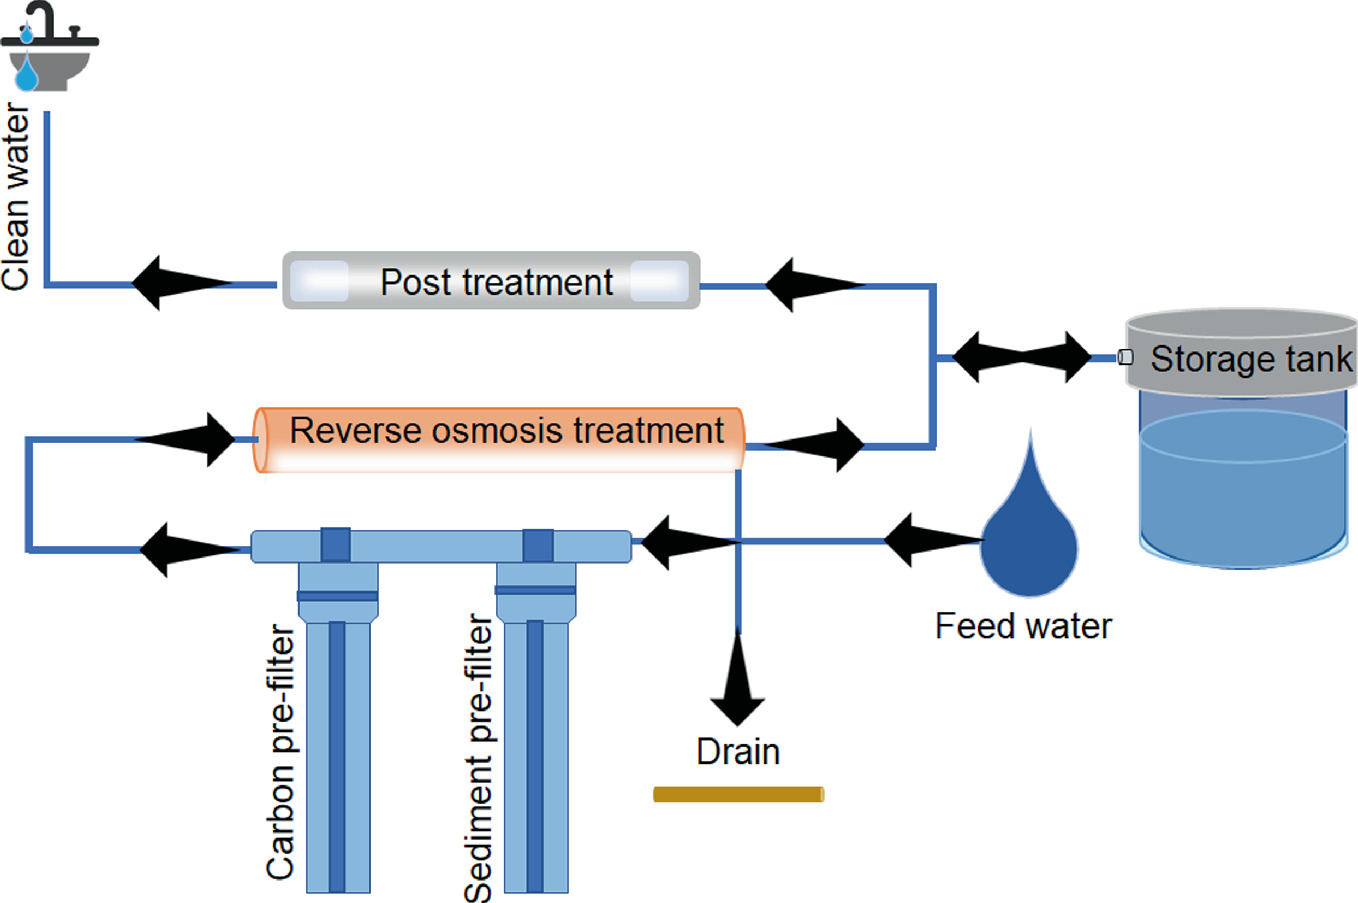 To Know More; Download PDF Brochure:&nbsp;https://bit.ly/3L16WbE&nbsp;The global point-of-use water treatment systems is expected to witness significant...